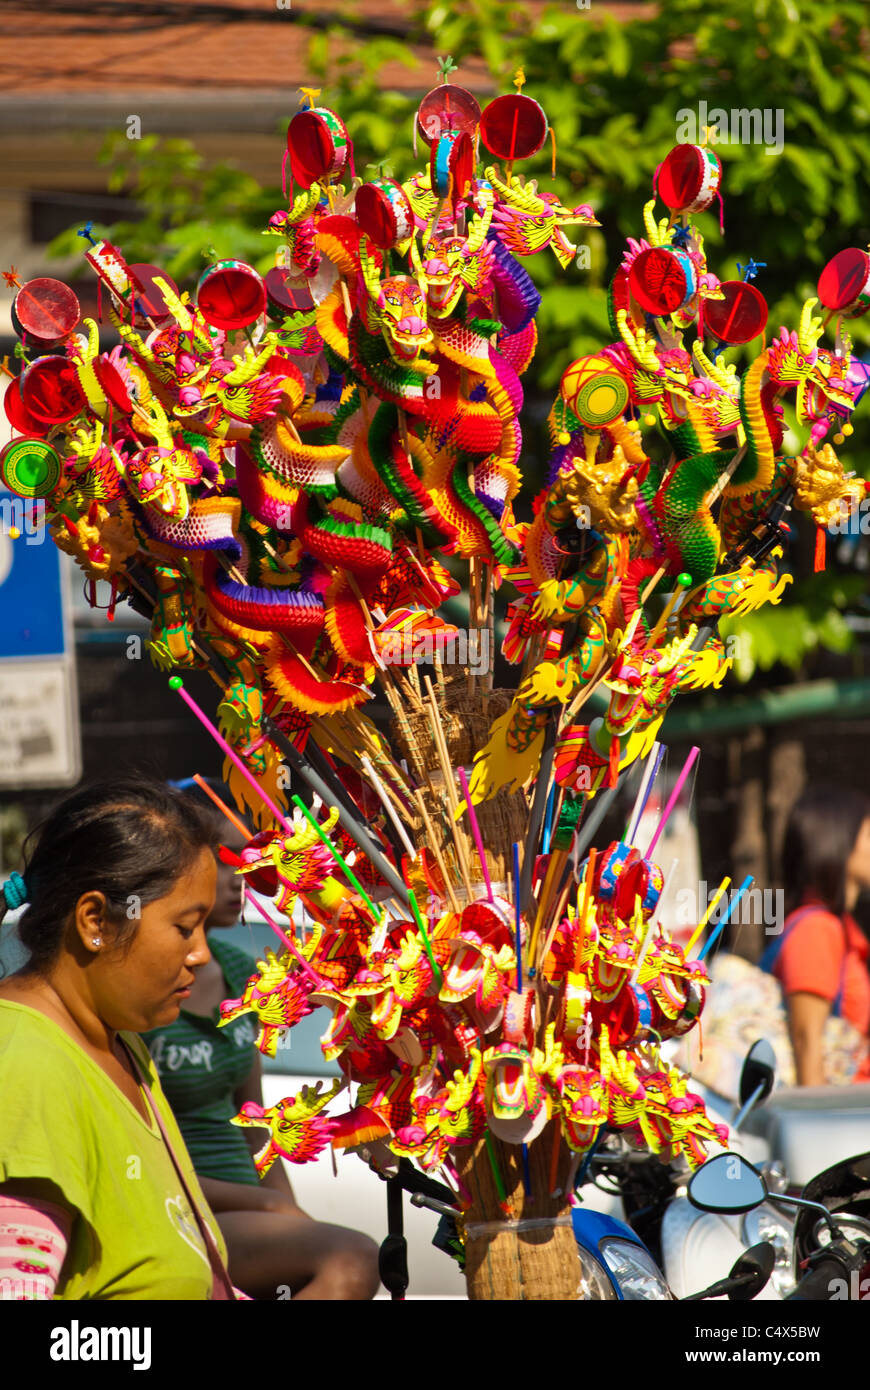 Street vendor selling Chinese toys on Chinese New Year, China town, Bangkok Stock Photo